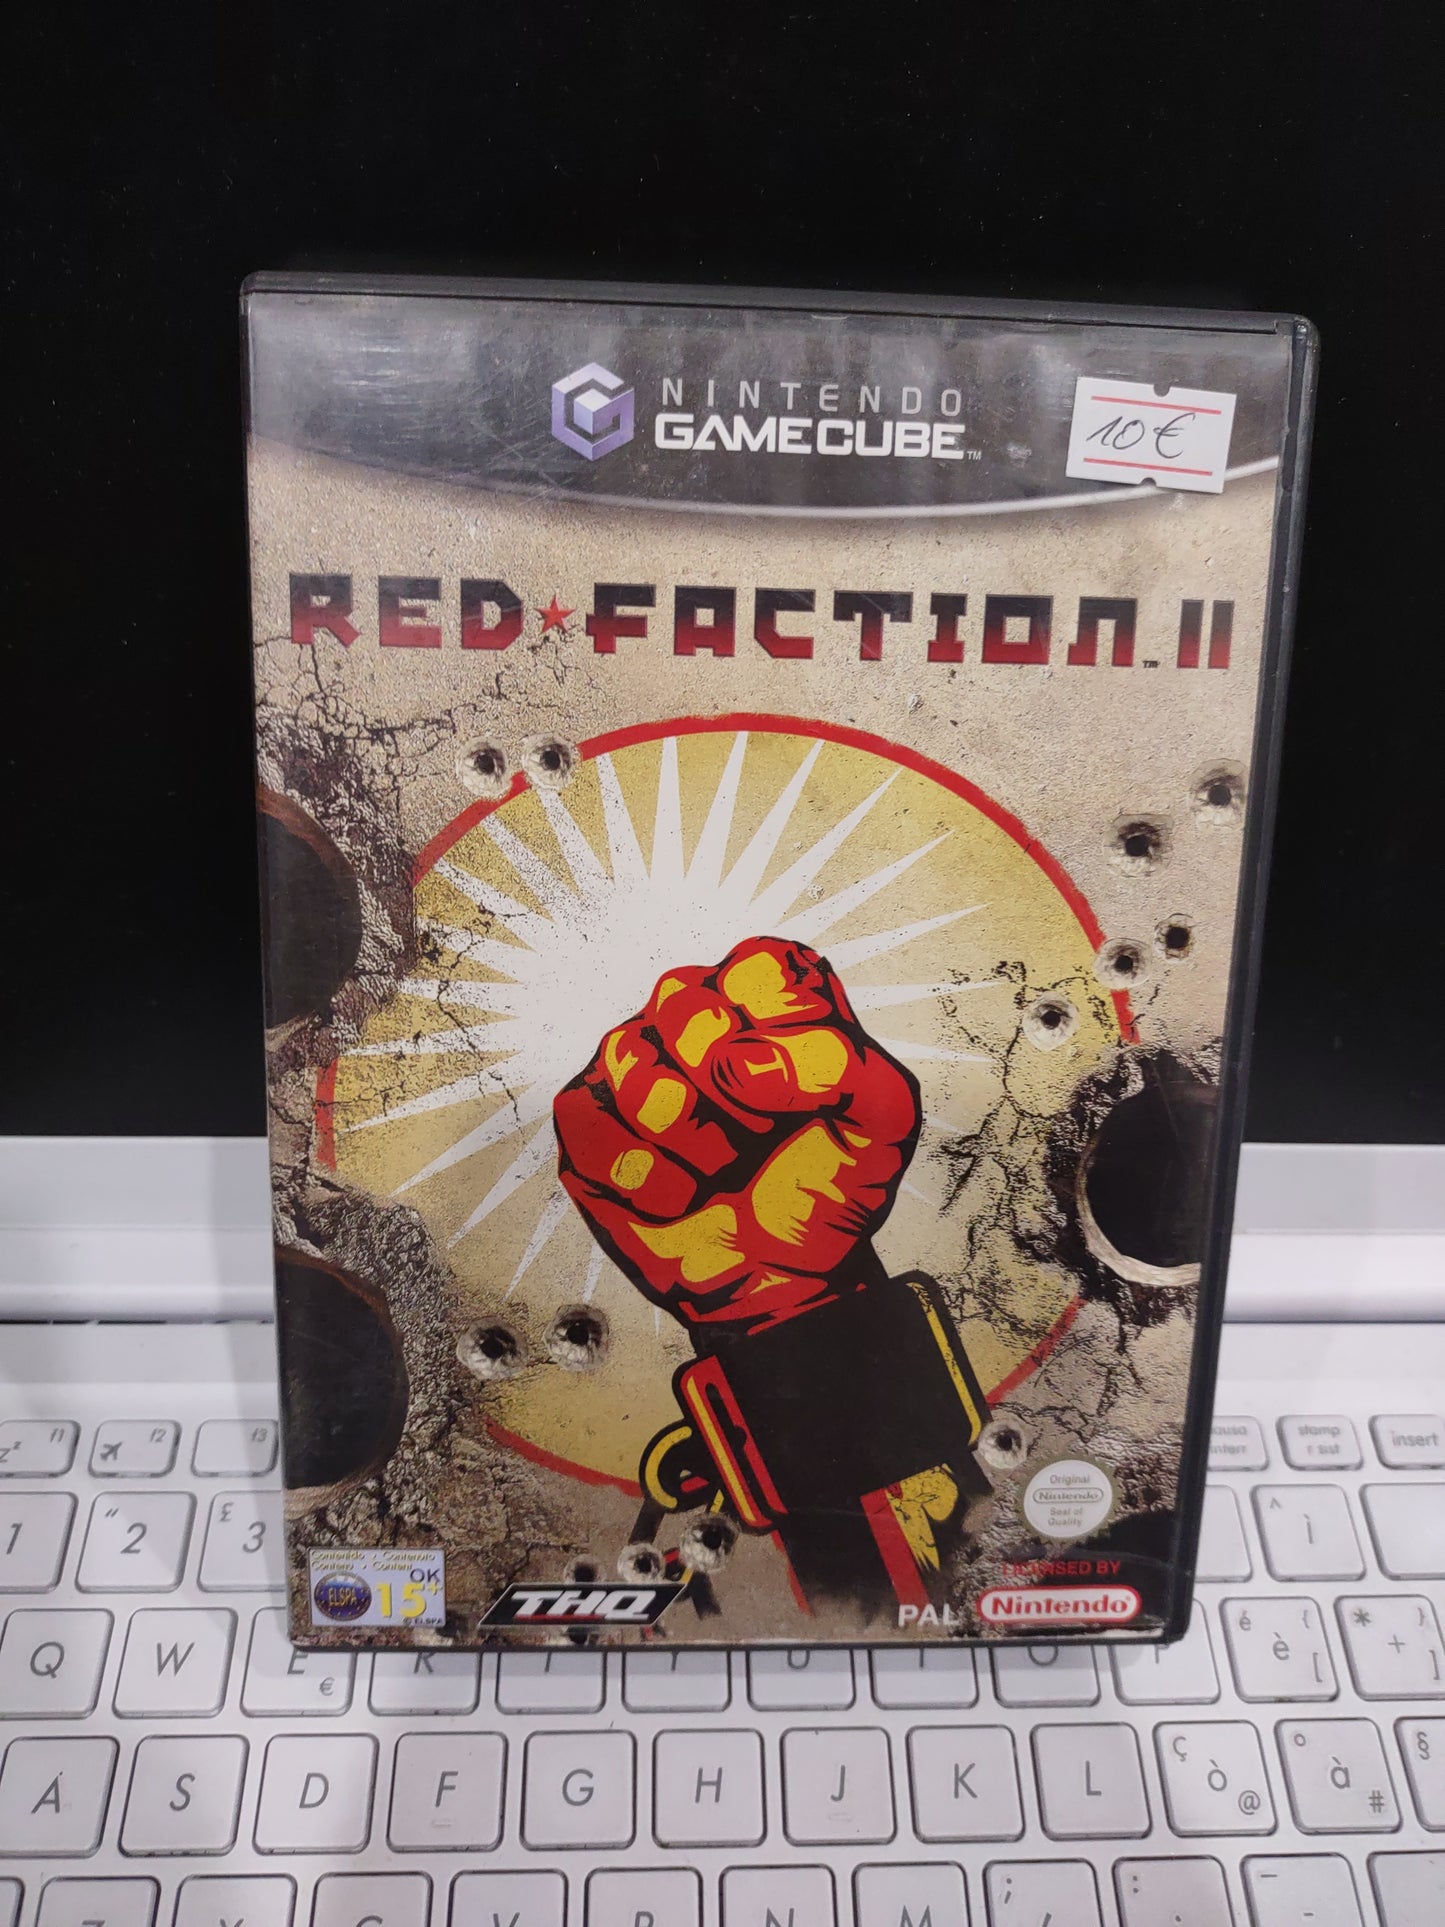 Gioco Nintendo GameCube Red faction 2 THQ pal